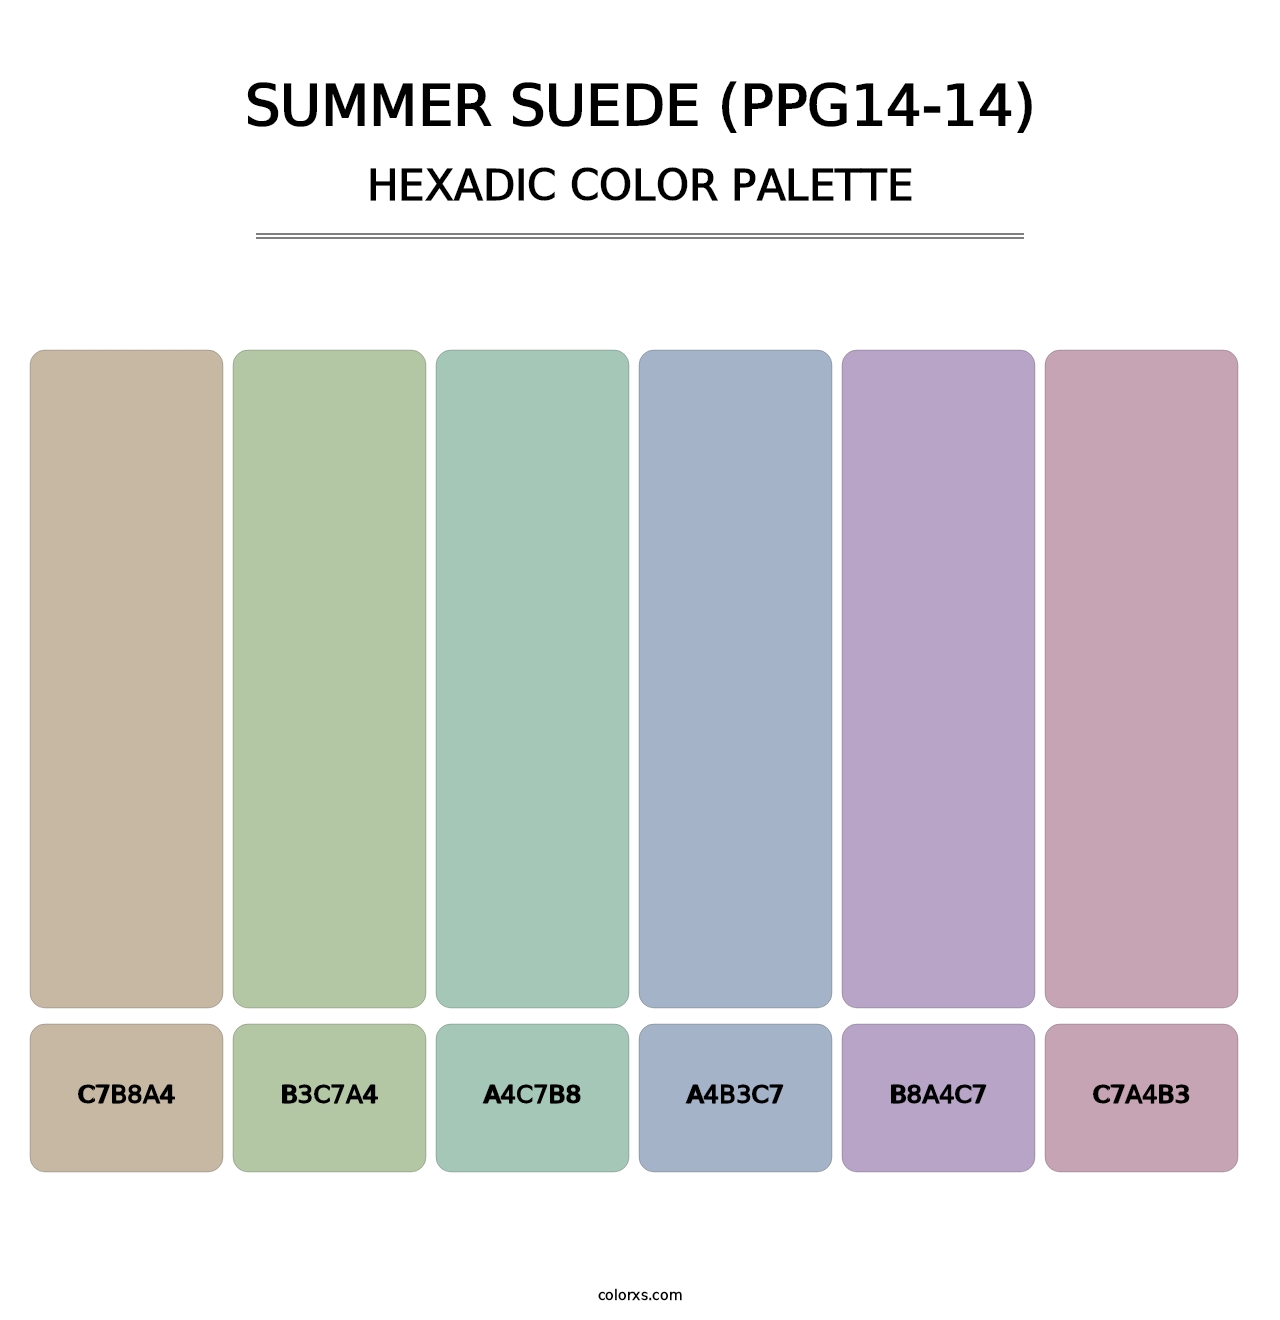 Summer Suede (PPG14-14) - Hexadic Color Palette